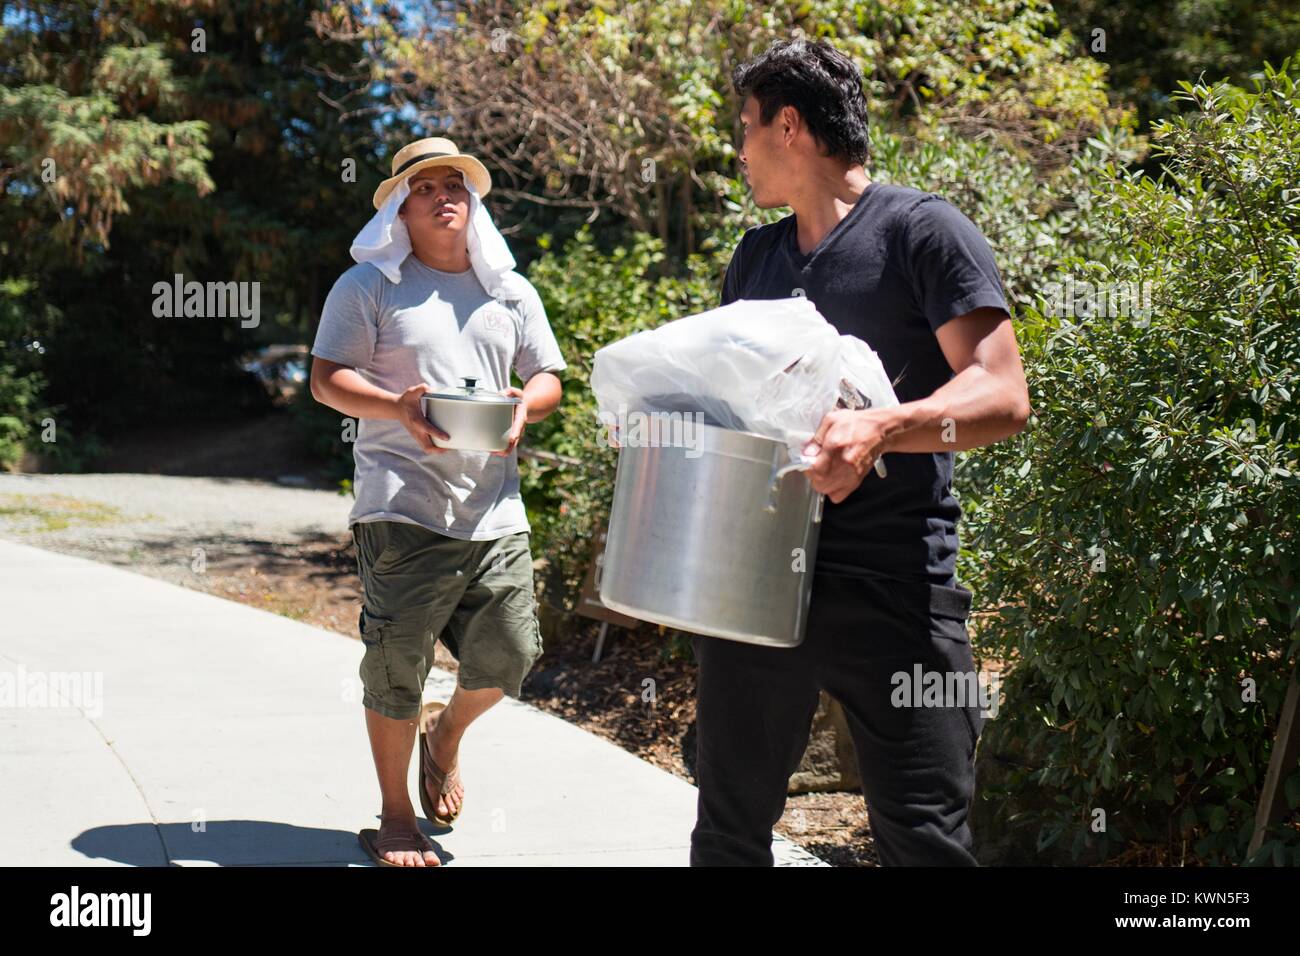 Two men, one wearing a straw hat and head scarf to protect himself from the hot sun, carry large metal pots of food towards a picnic site at Lake Chabot Regional Park, an East Bay Regional Park in the San Francisco Bay Area town of San Leandro, California, July 16, 2017. Stock Photo